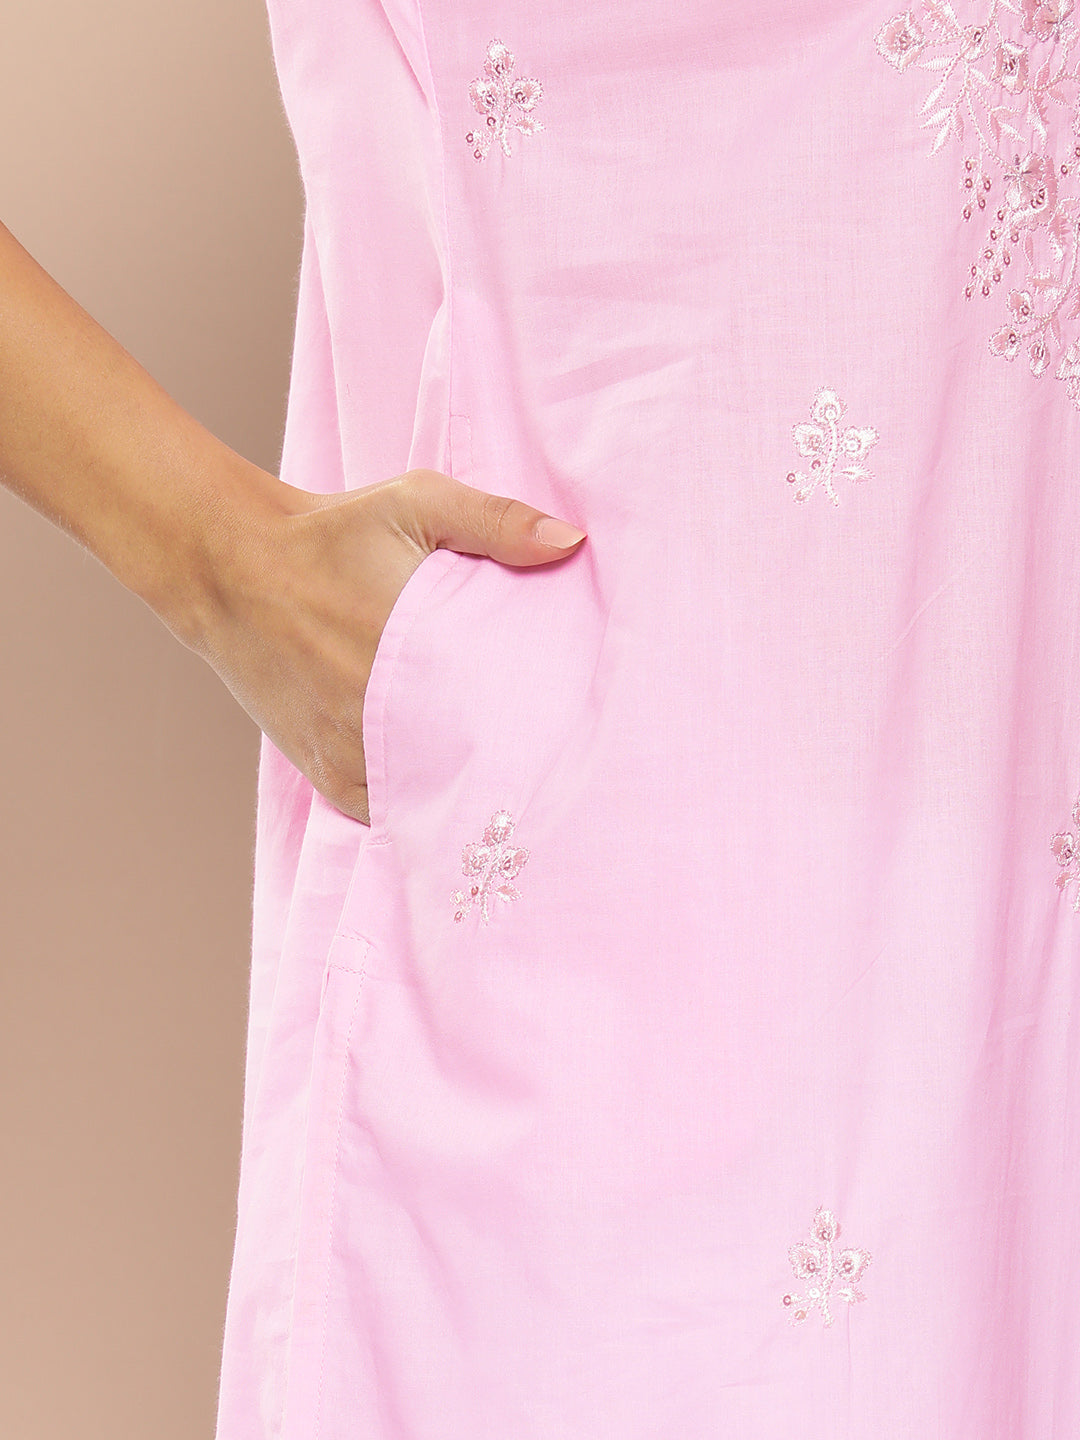 Pink Floral Embroidered Kurta